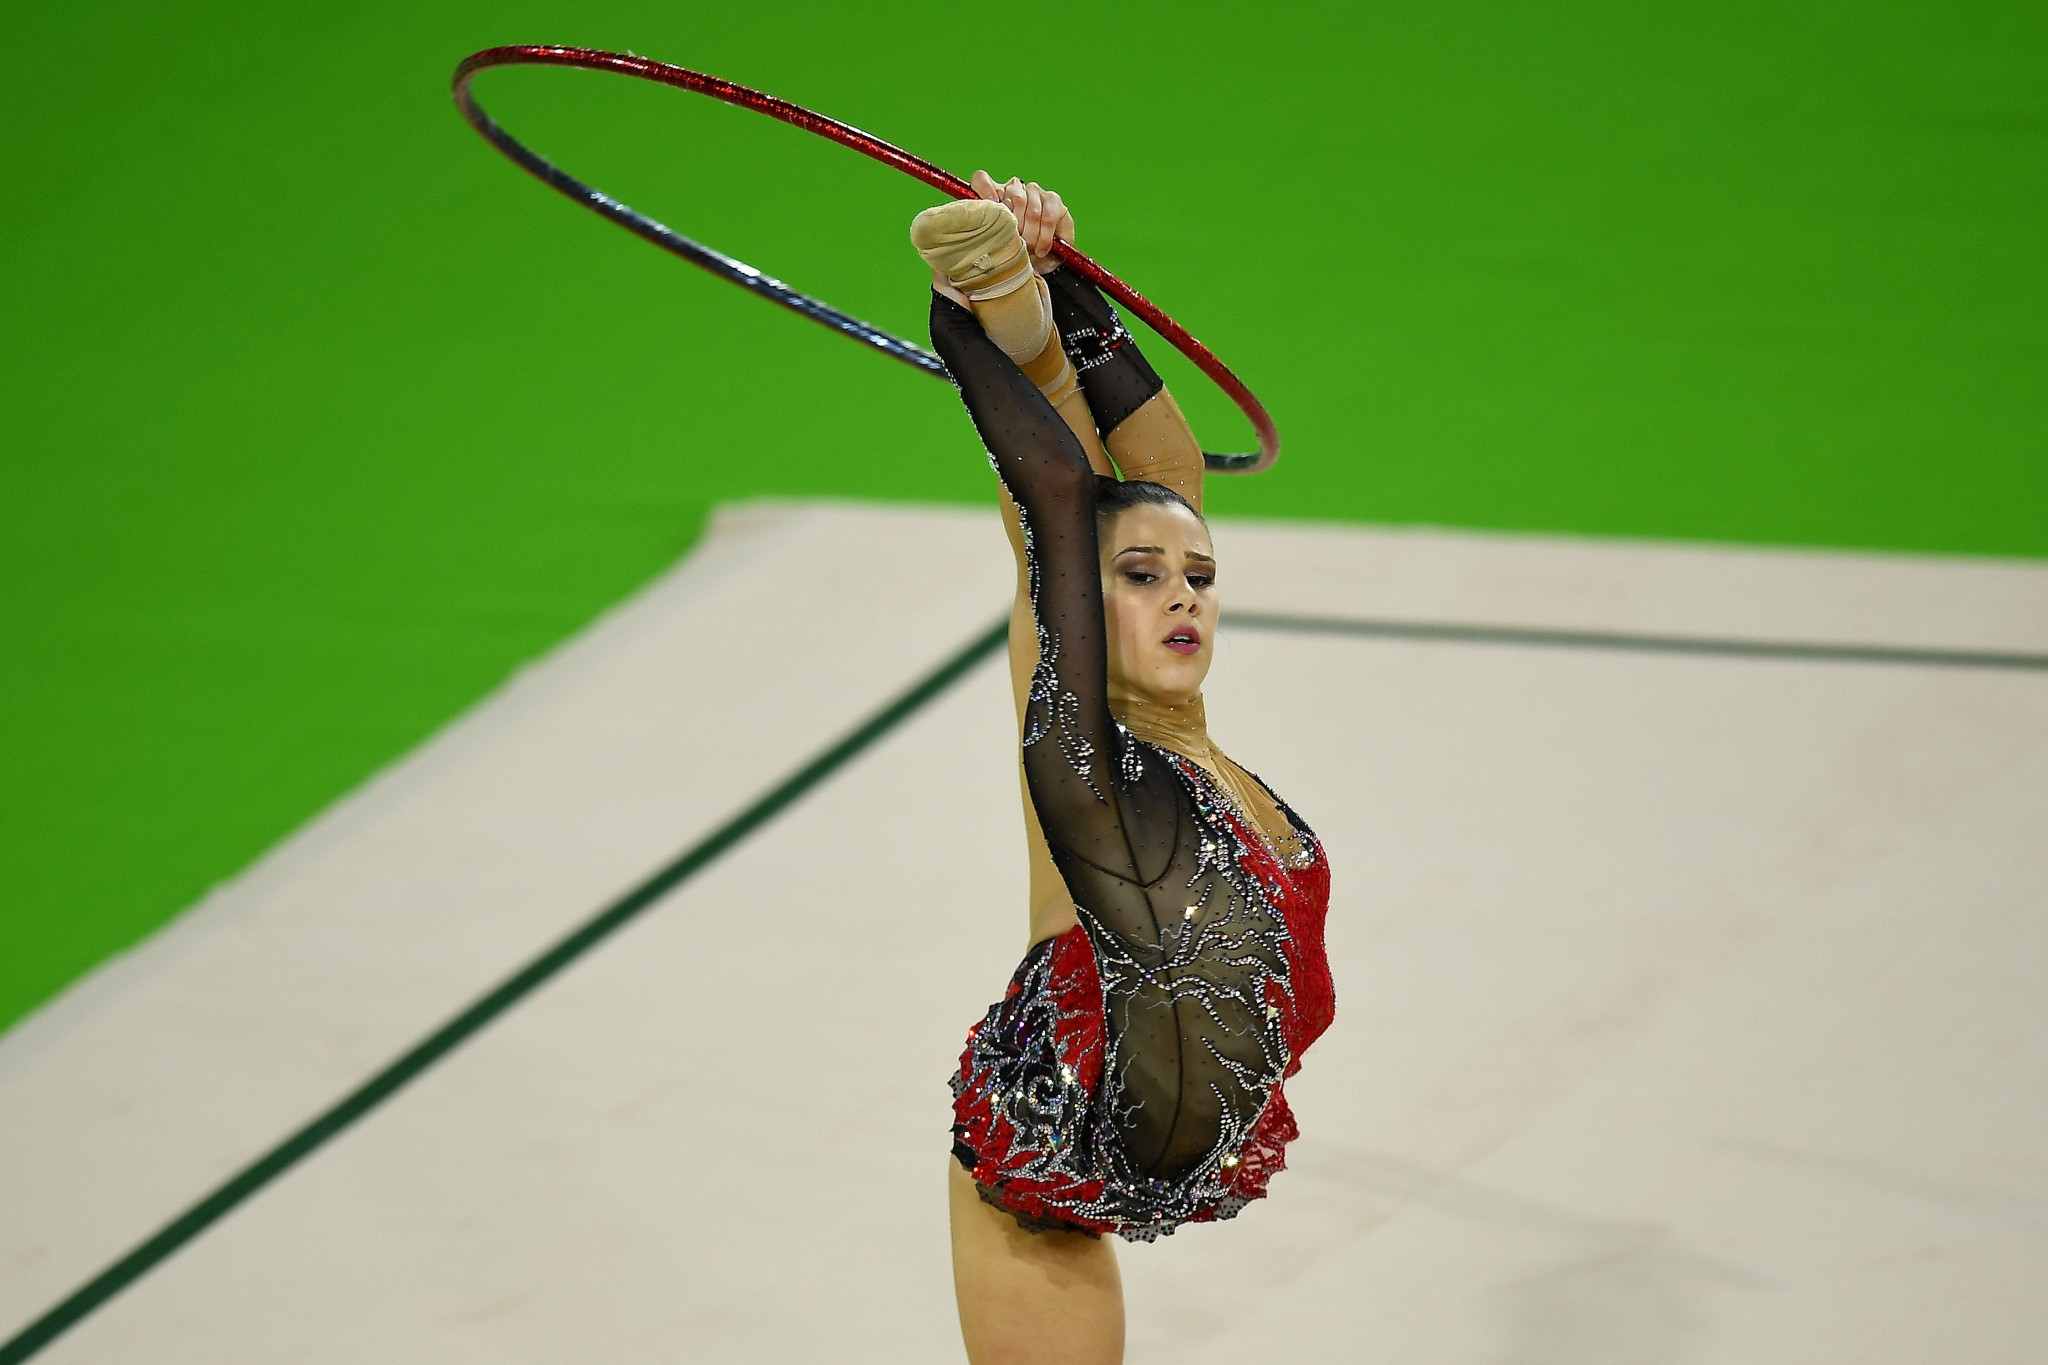 Cyprus' Diamanto Evripidou won the hoop at the rhythmic gymnastics ends Gold Coast 2018 with a total of six medals ©Getty Images